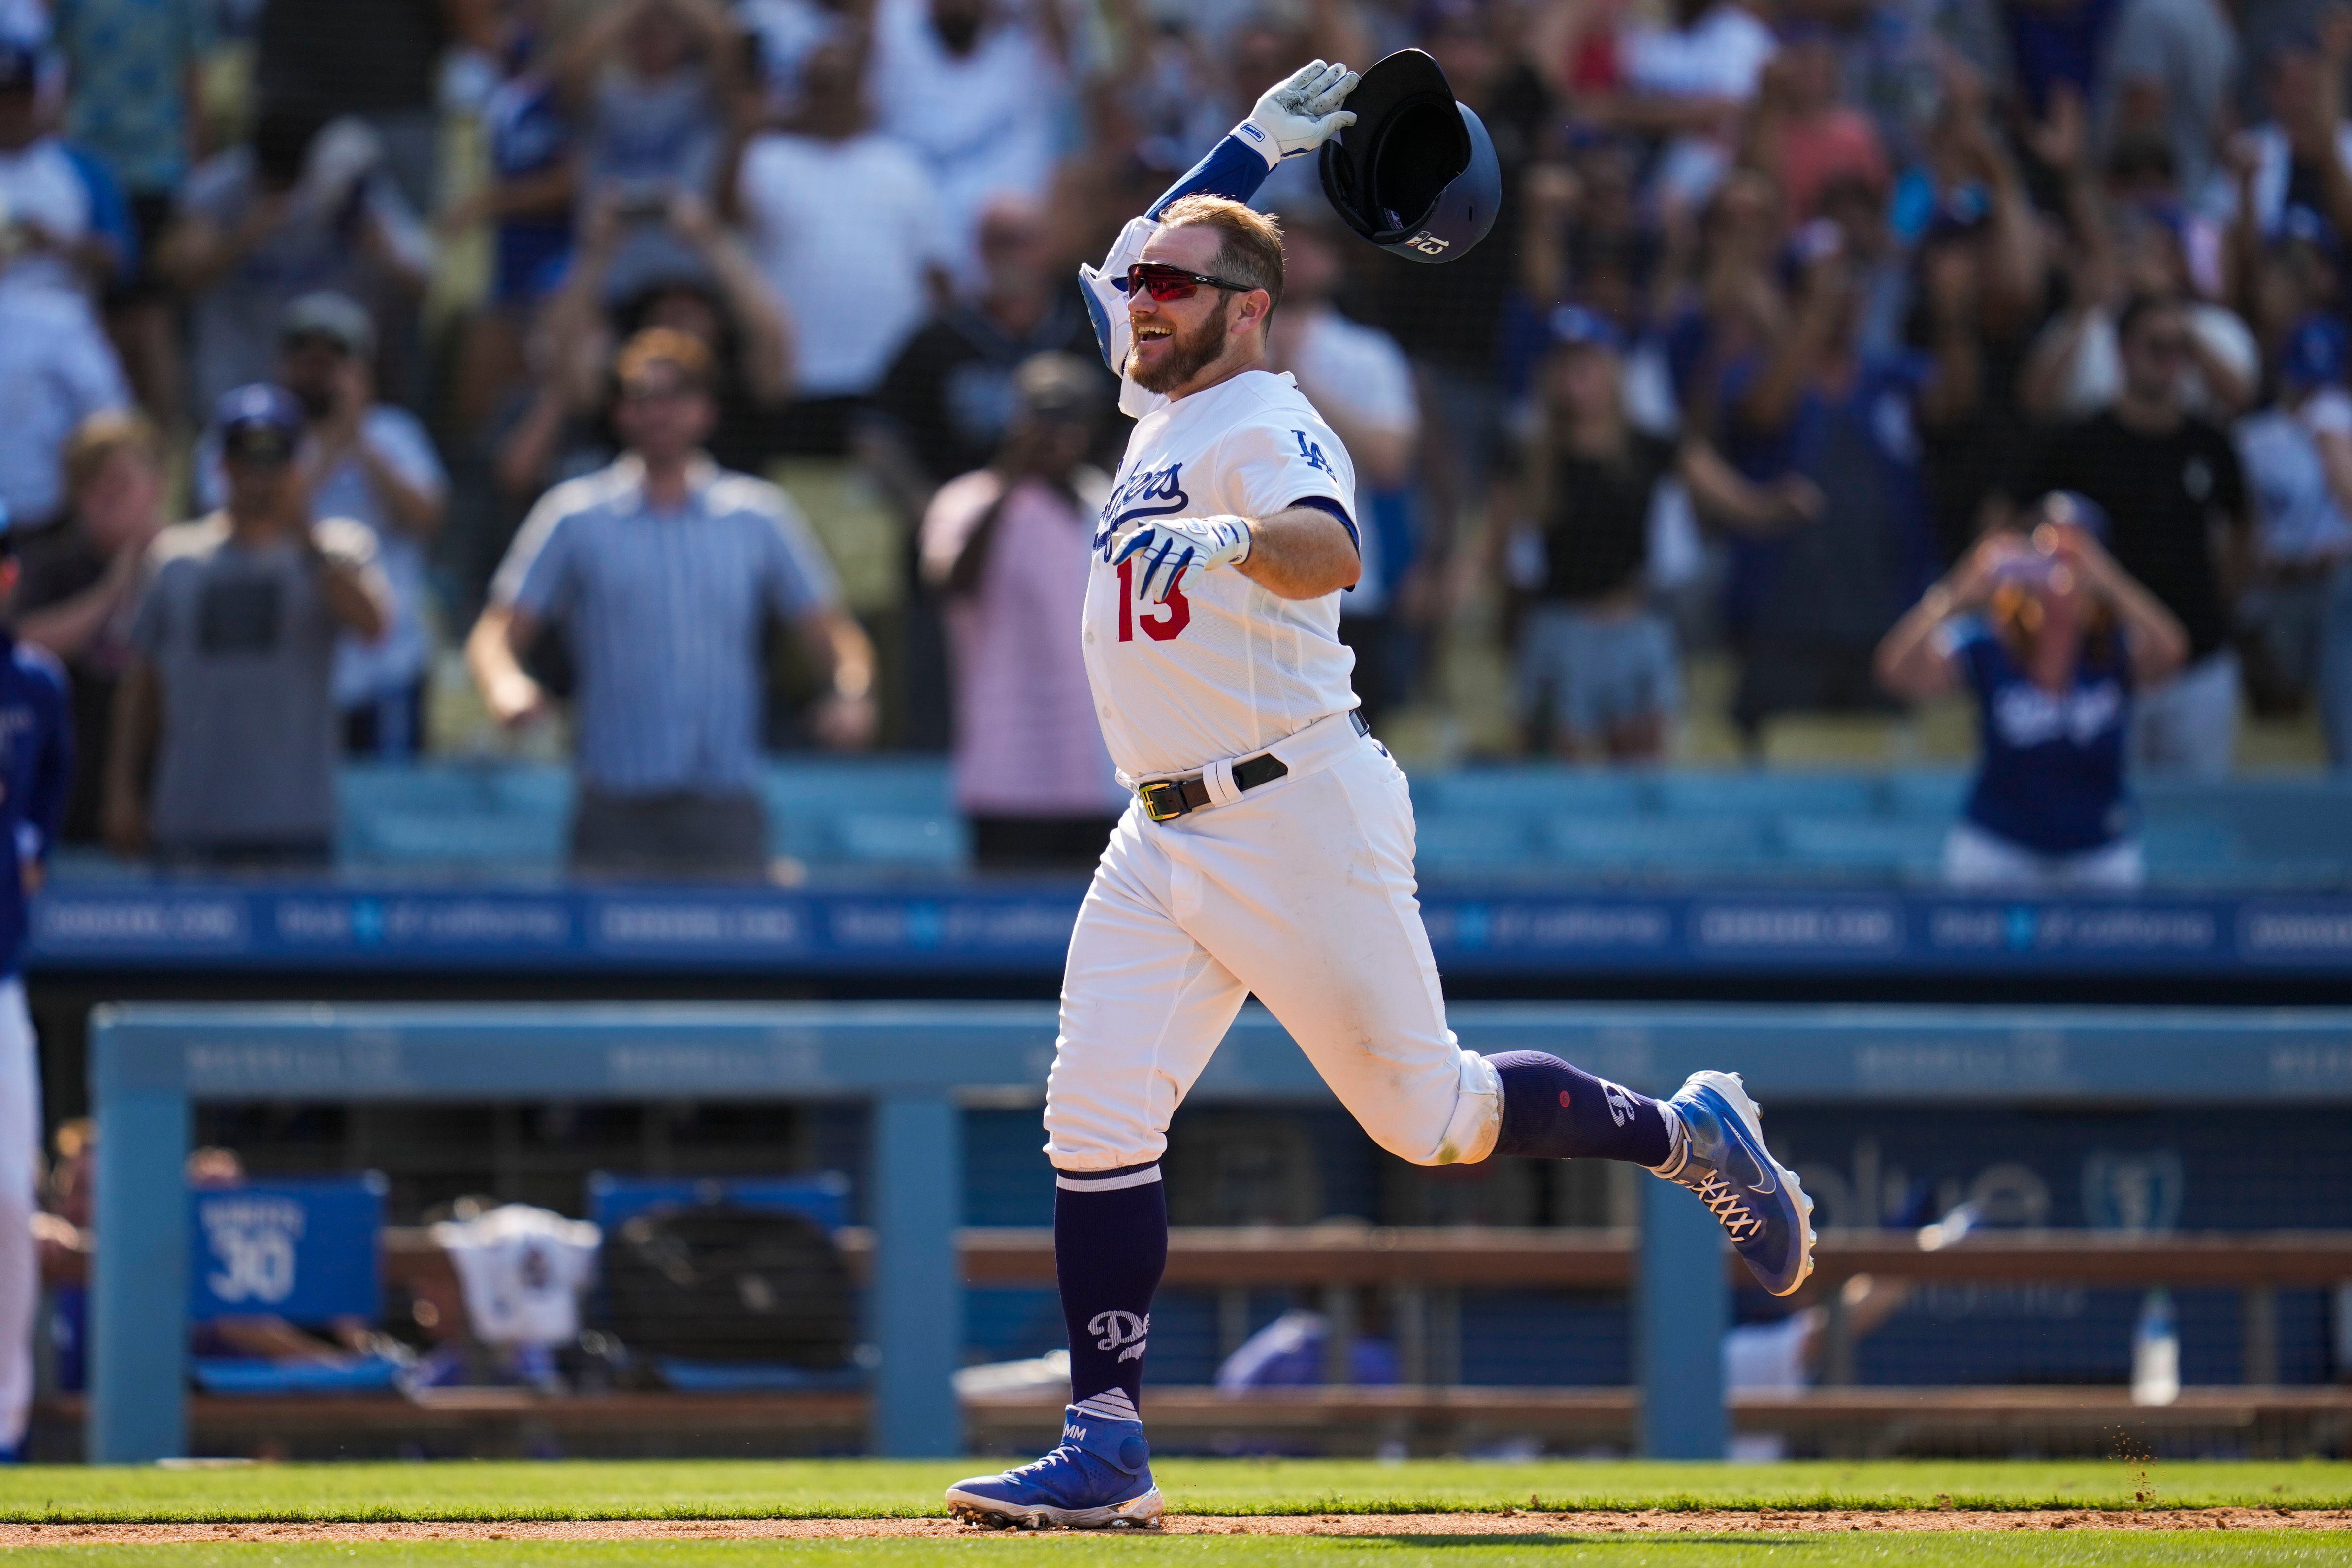 Max Muncy has made a name for himself at Thousand Oaks High